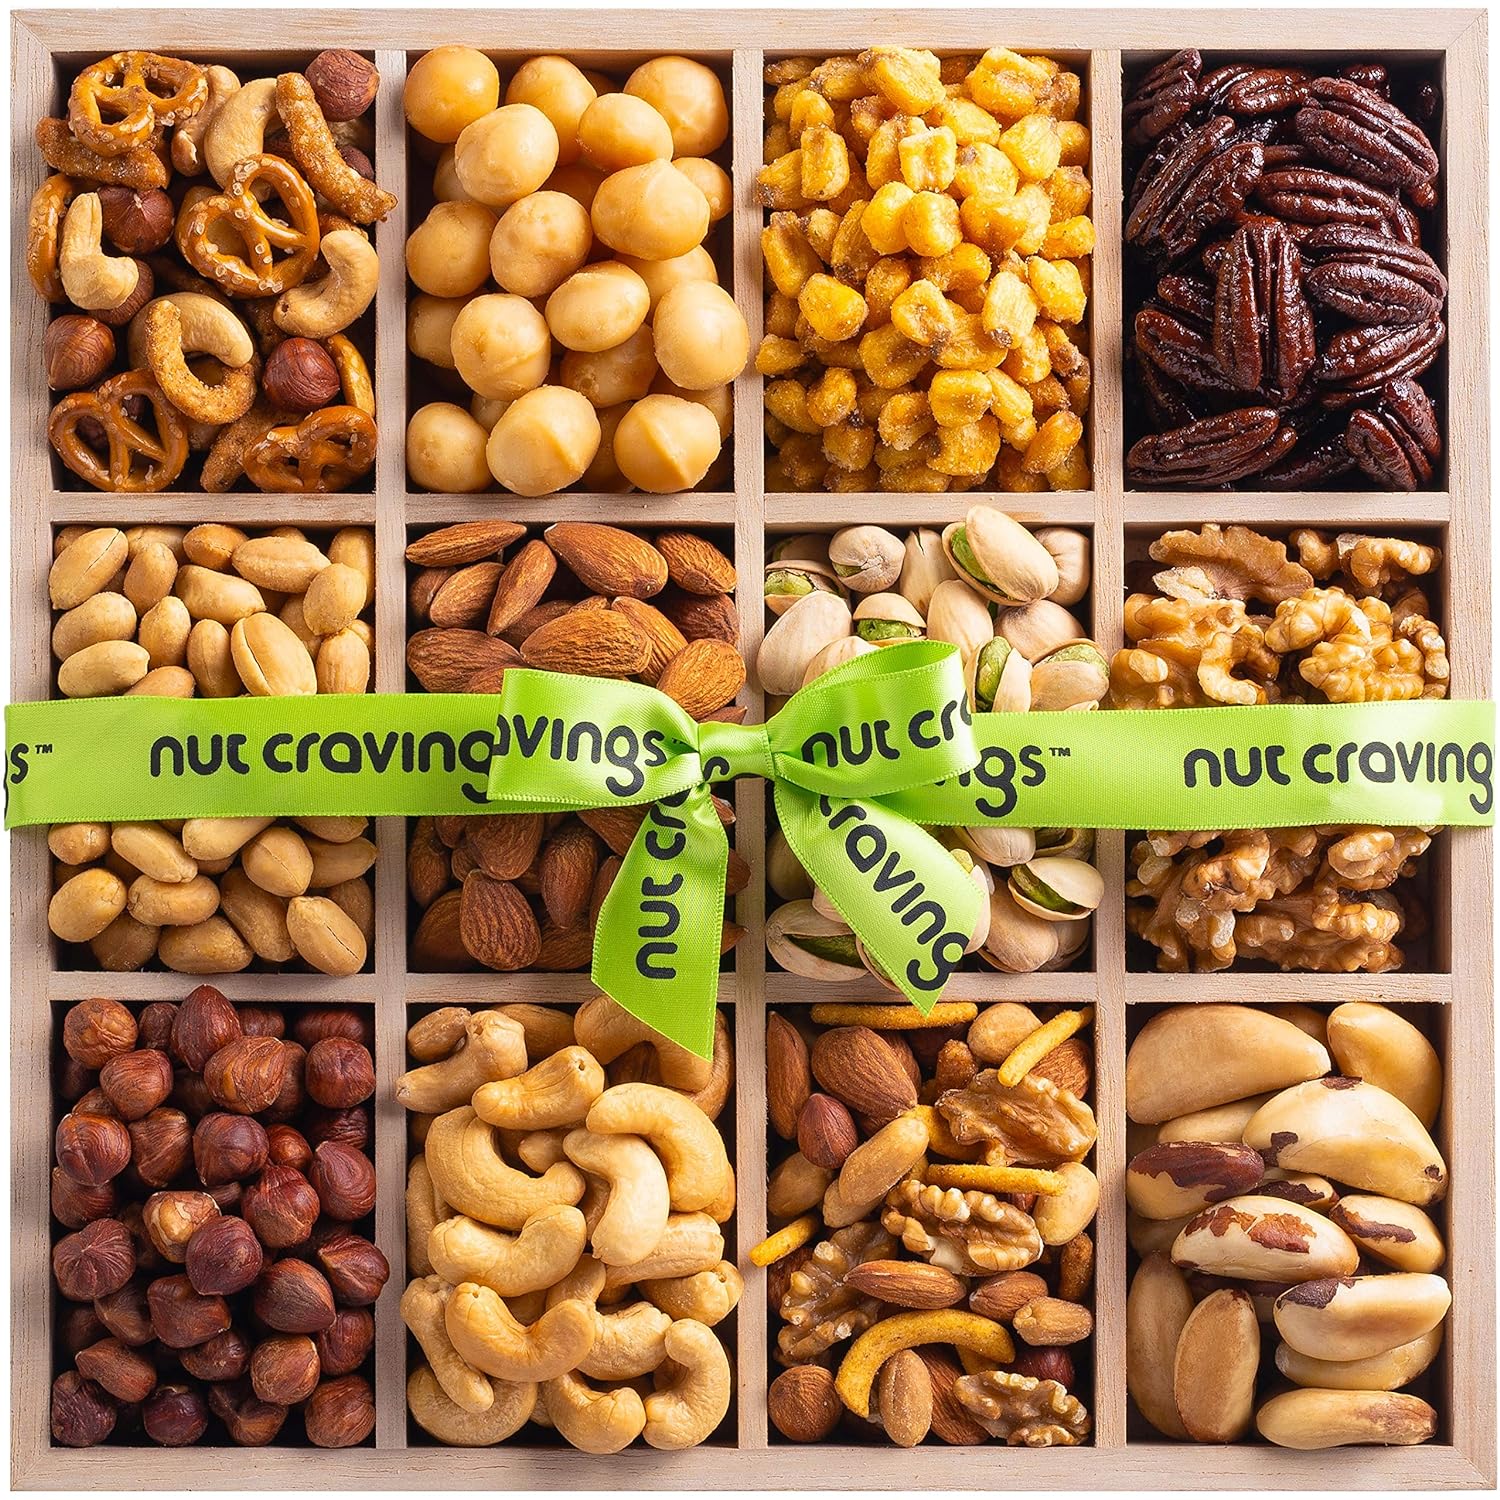 Nut Cravings Gourmet Collection - Mothers Day Mixed Nuts Gift Basket in Reusable Wooden Tray + Green Ribbon (12 Assortments) Arrangement Platter, Healthy Kosher USA Made